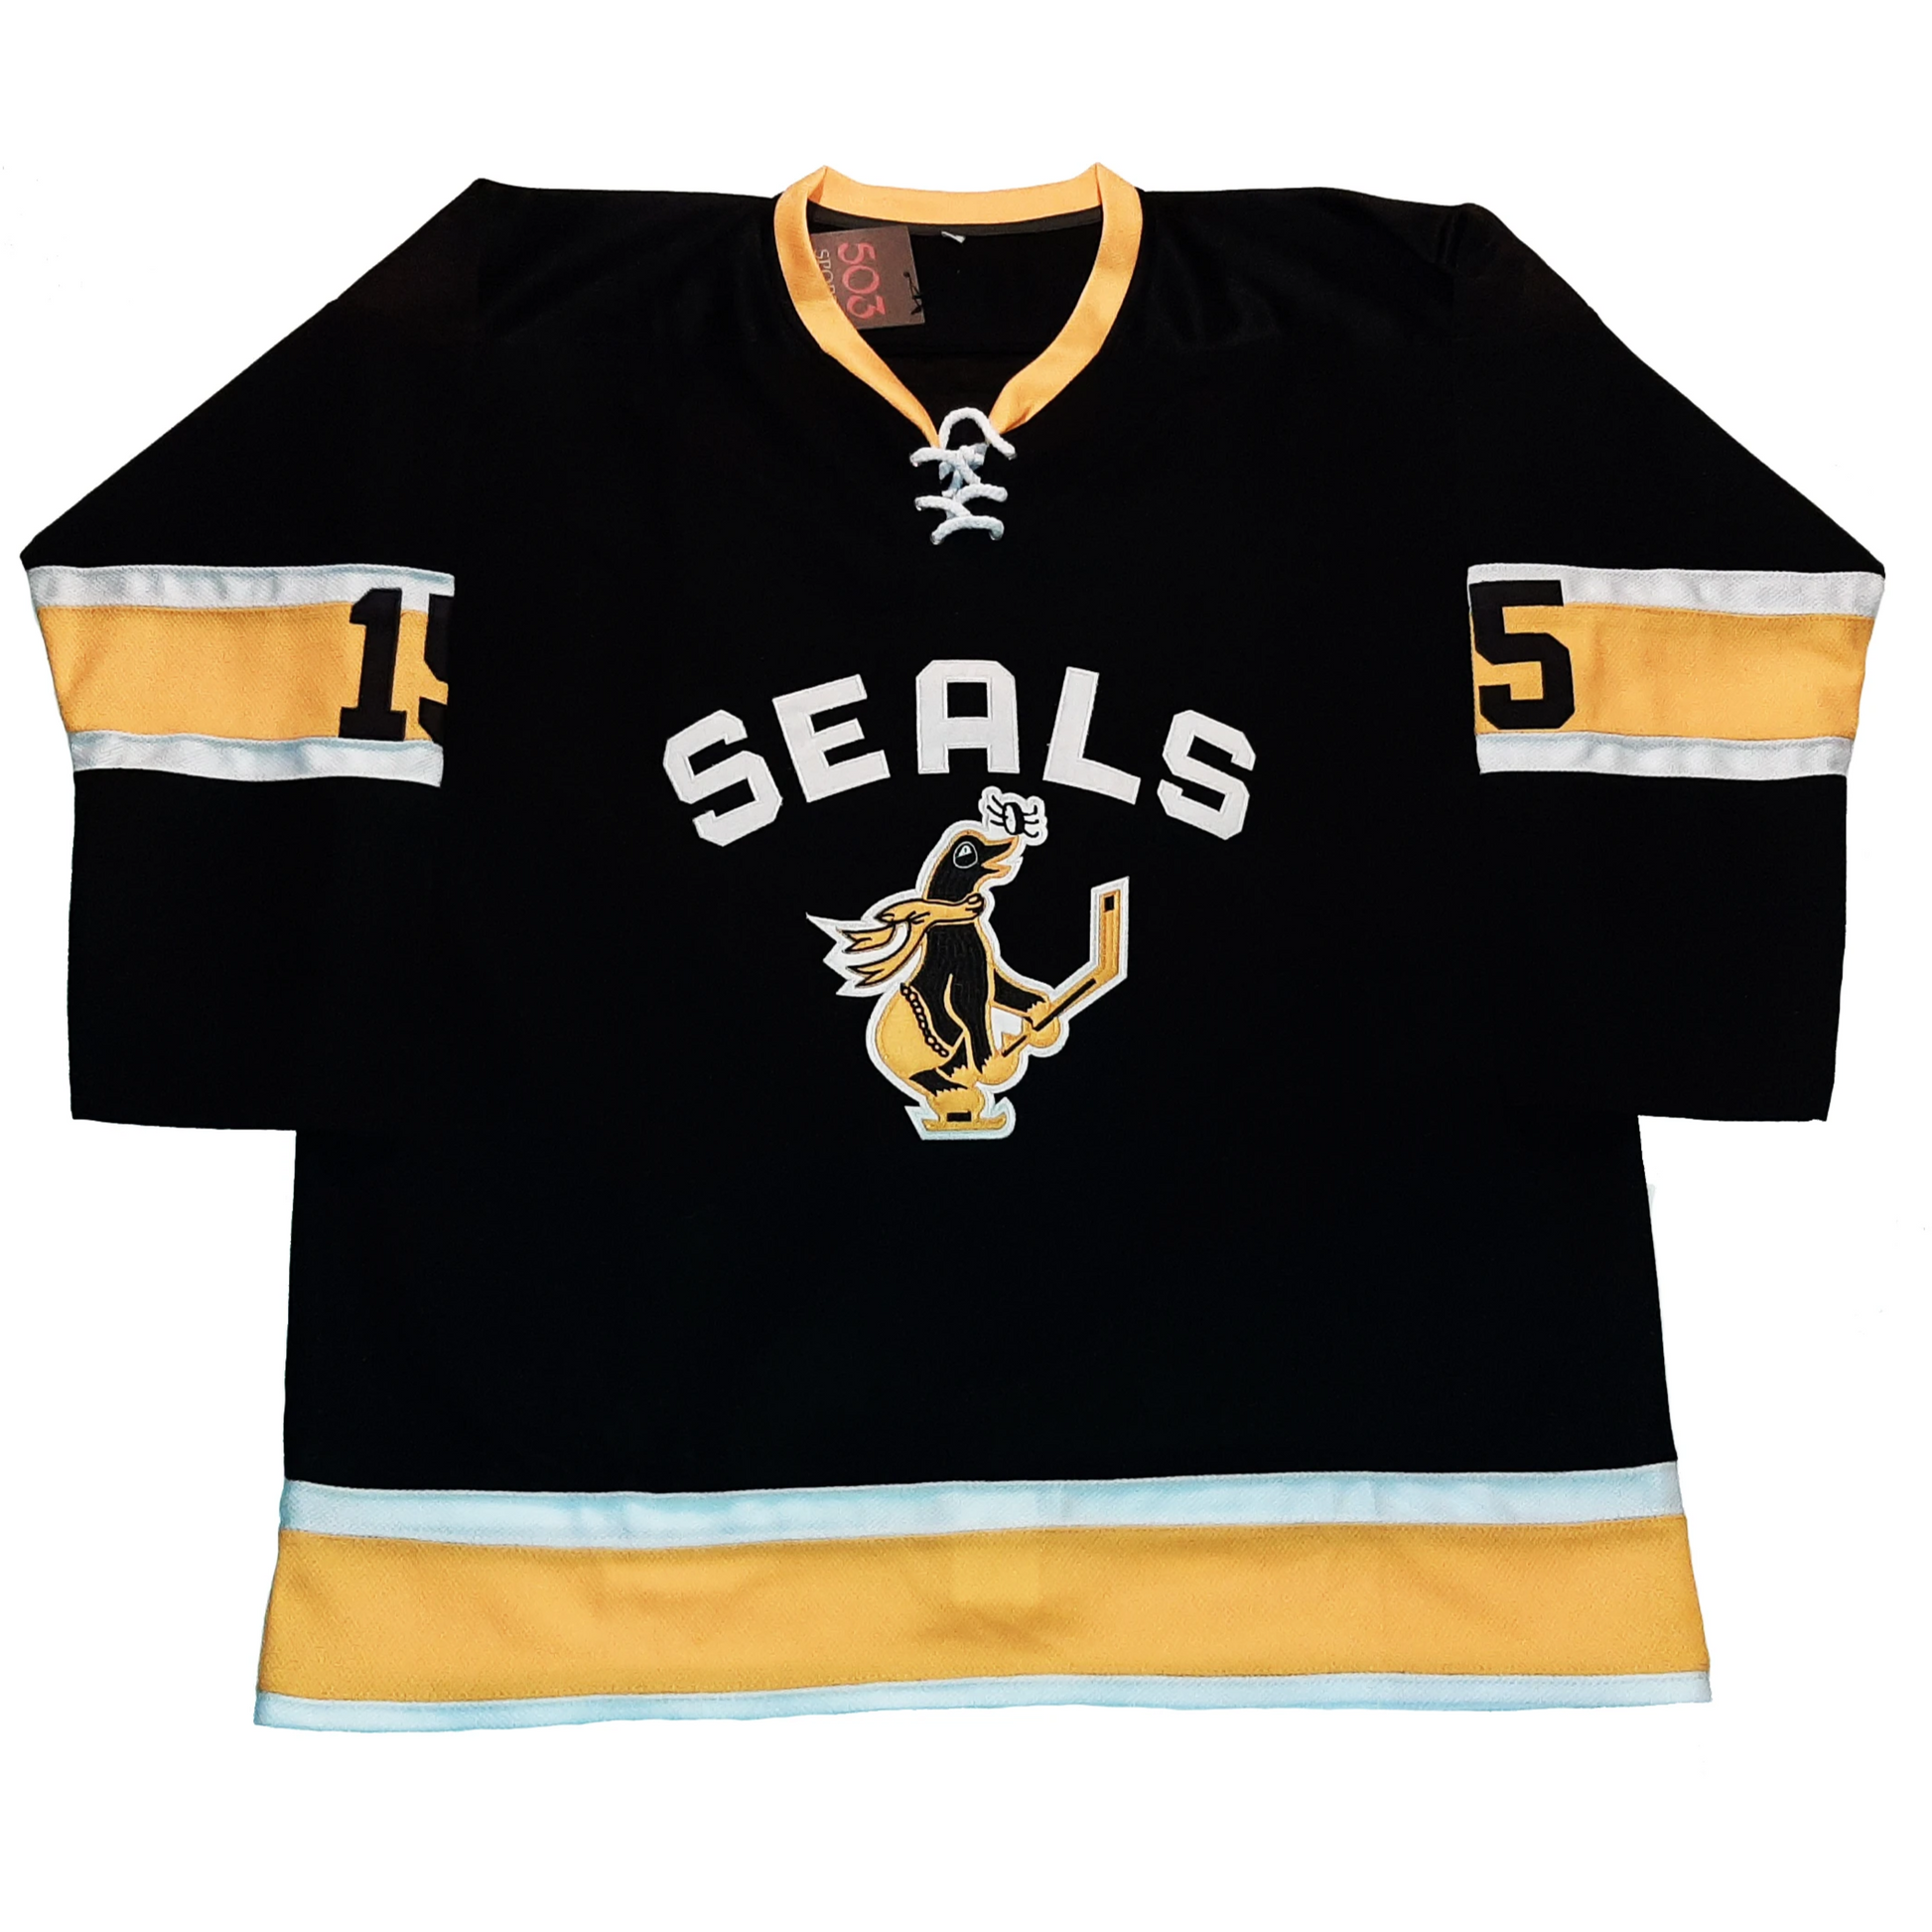 NHL shop has the All-Star jerseys with customization finally up